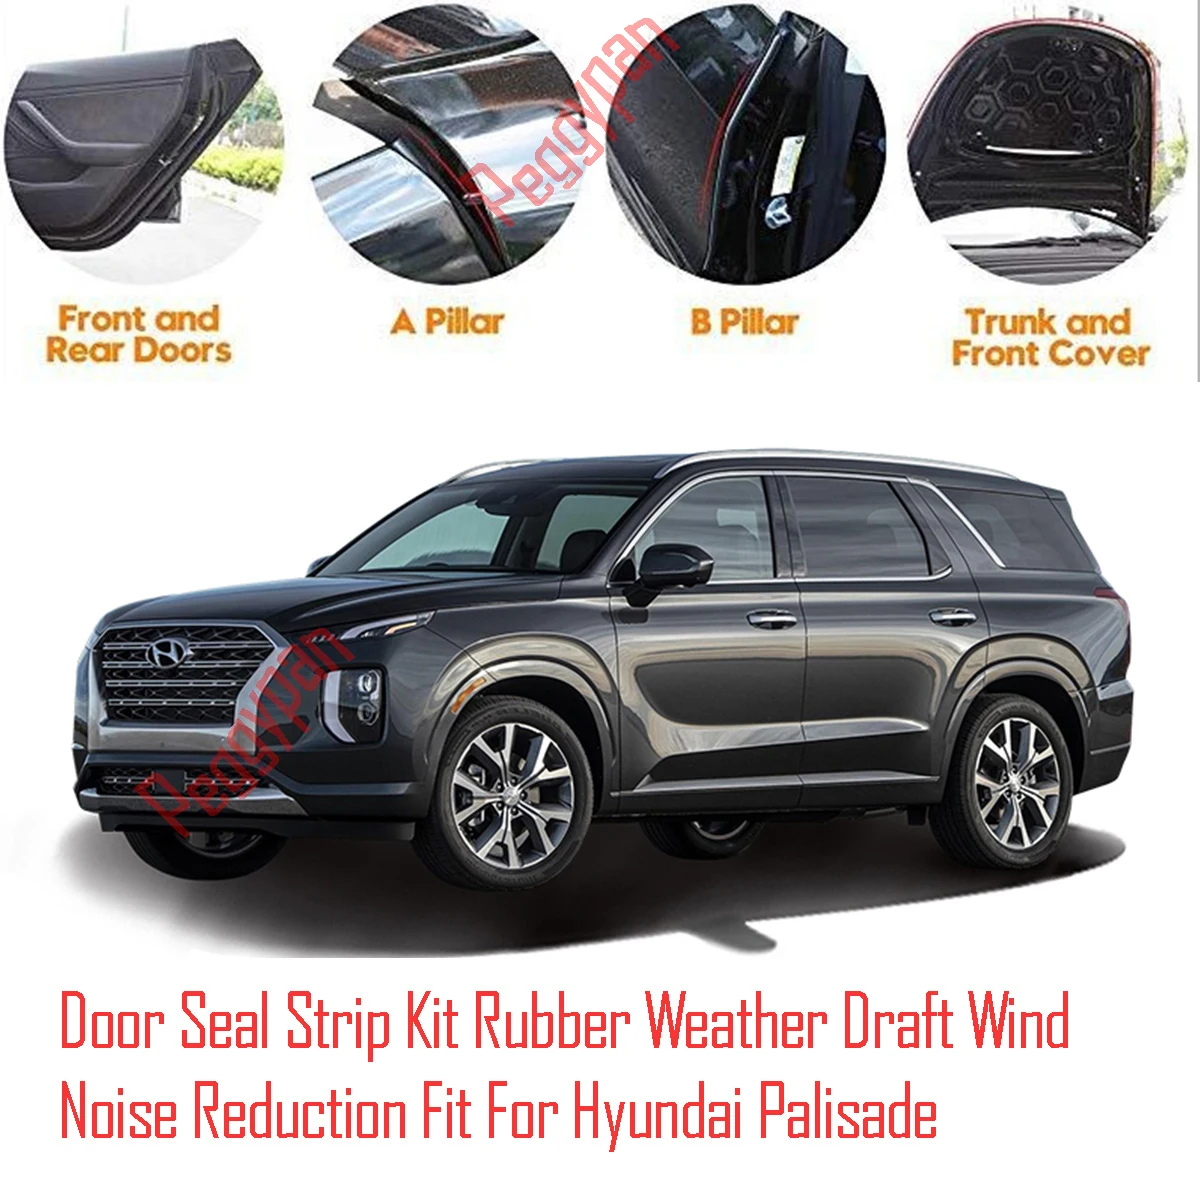 Door Seal Strip Kit Self Adhesive Window Engine Cover Soundproof Rubber Weather Draft Wind Noise Reduction Fit For Hyundai Palis